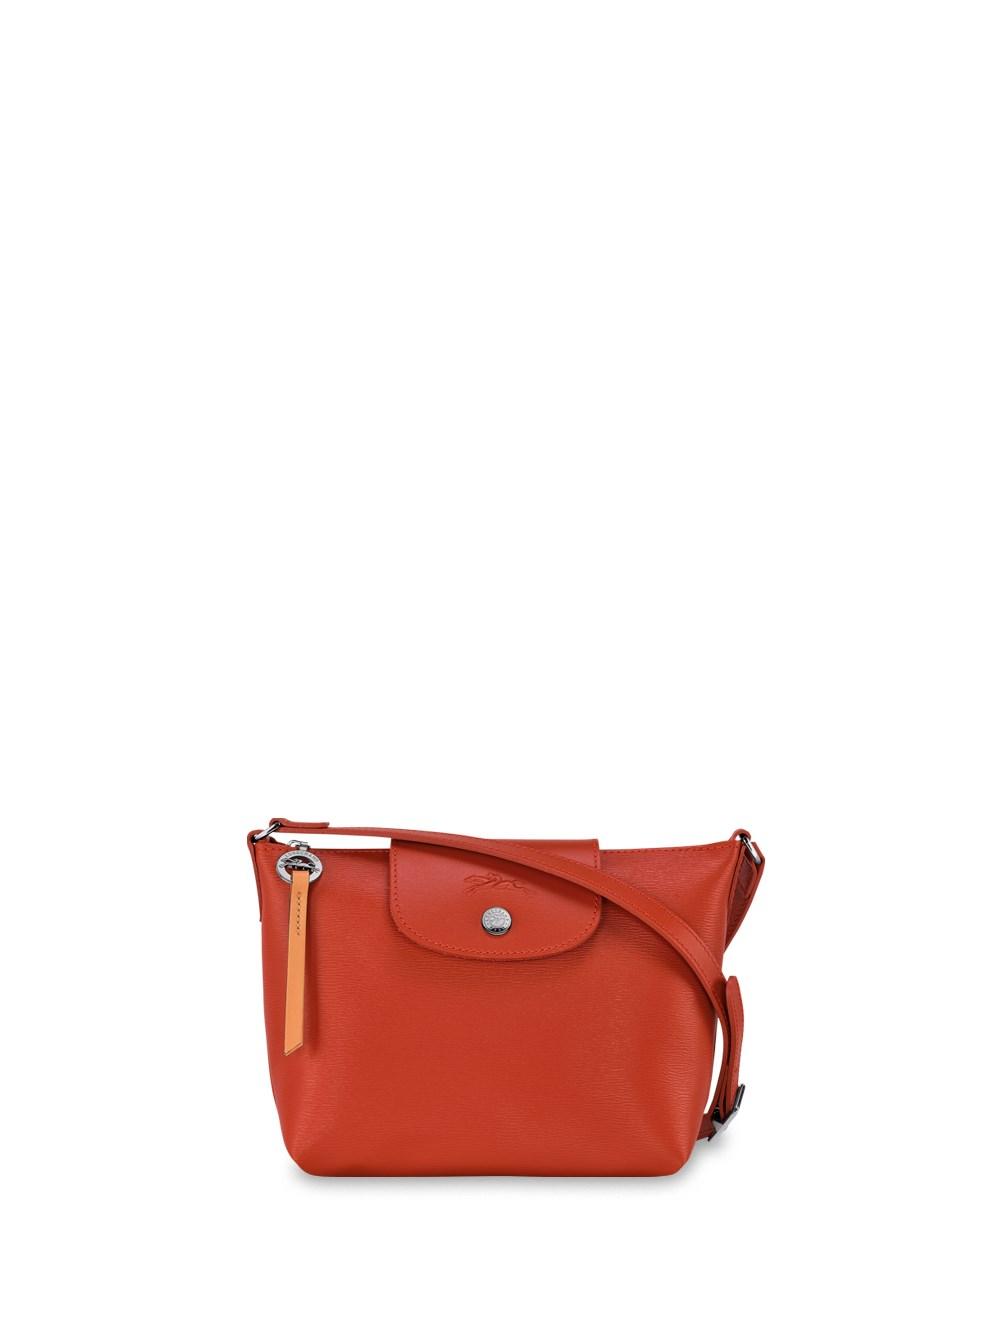 Longchamp `le Pliage City` Extra Small Crossbody Bag in Red